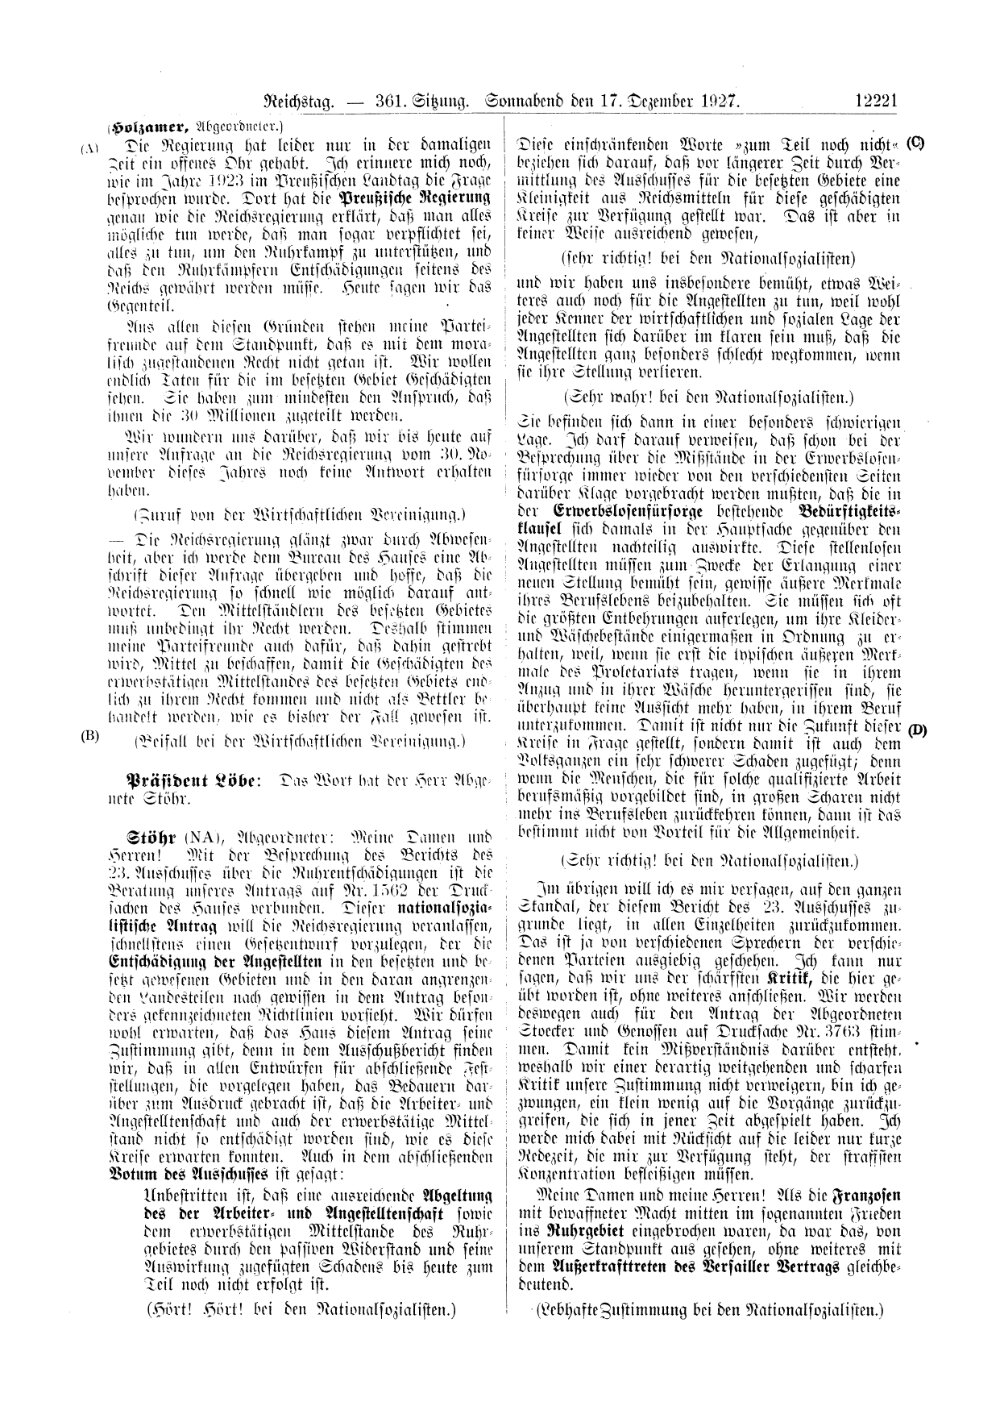 Scan of page 12221